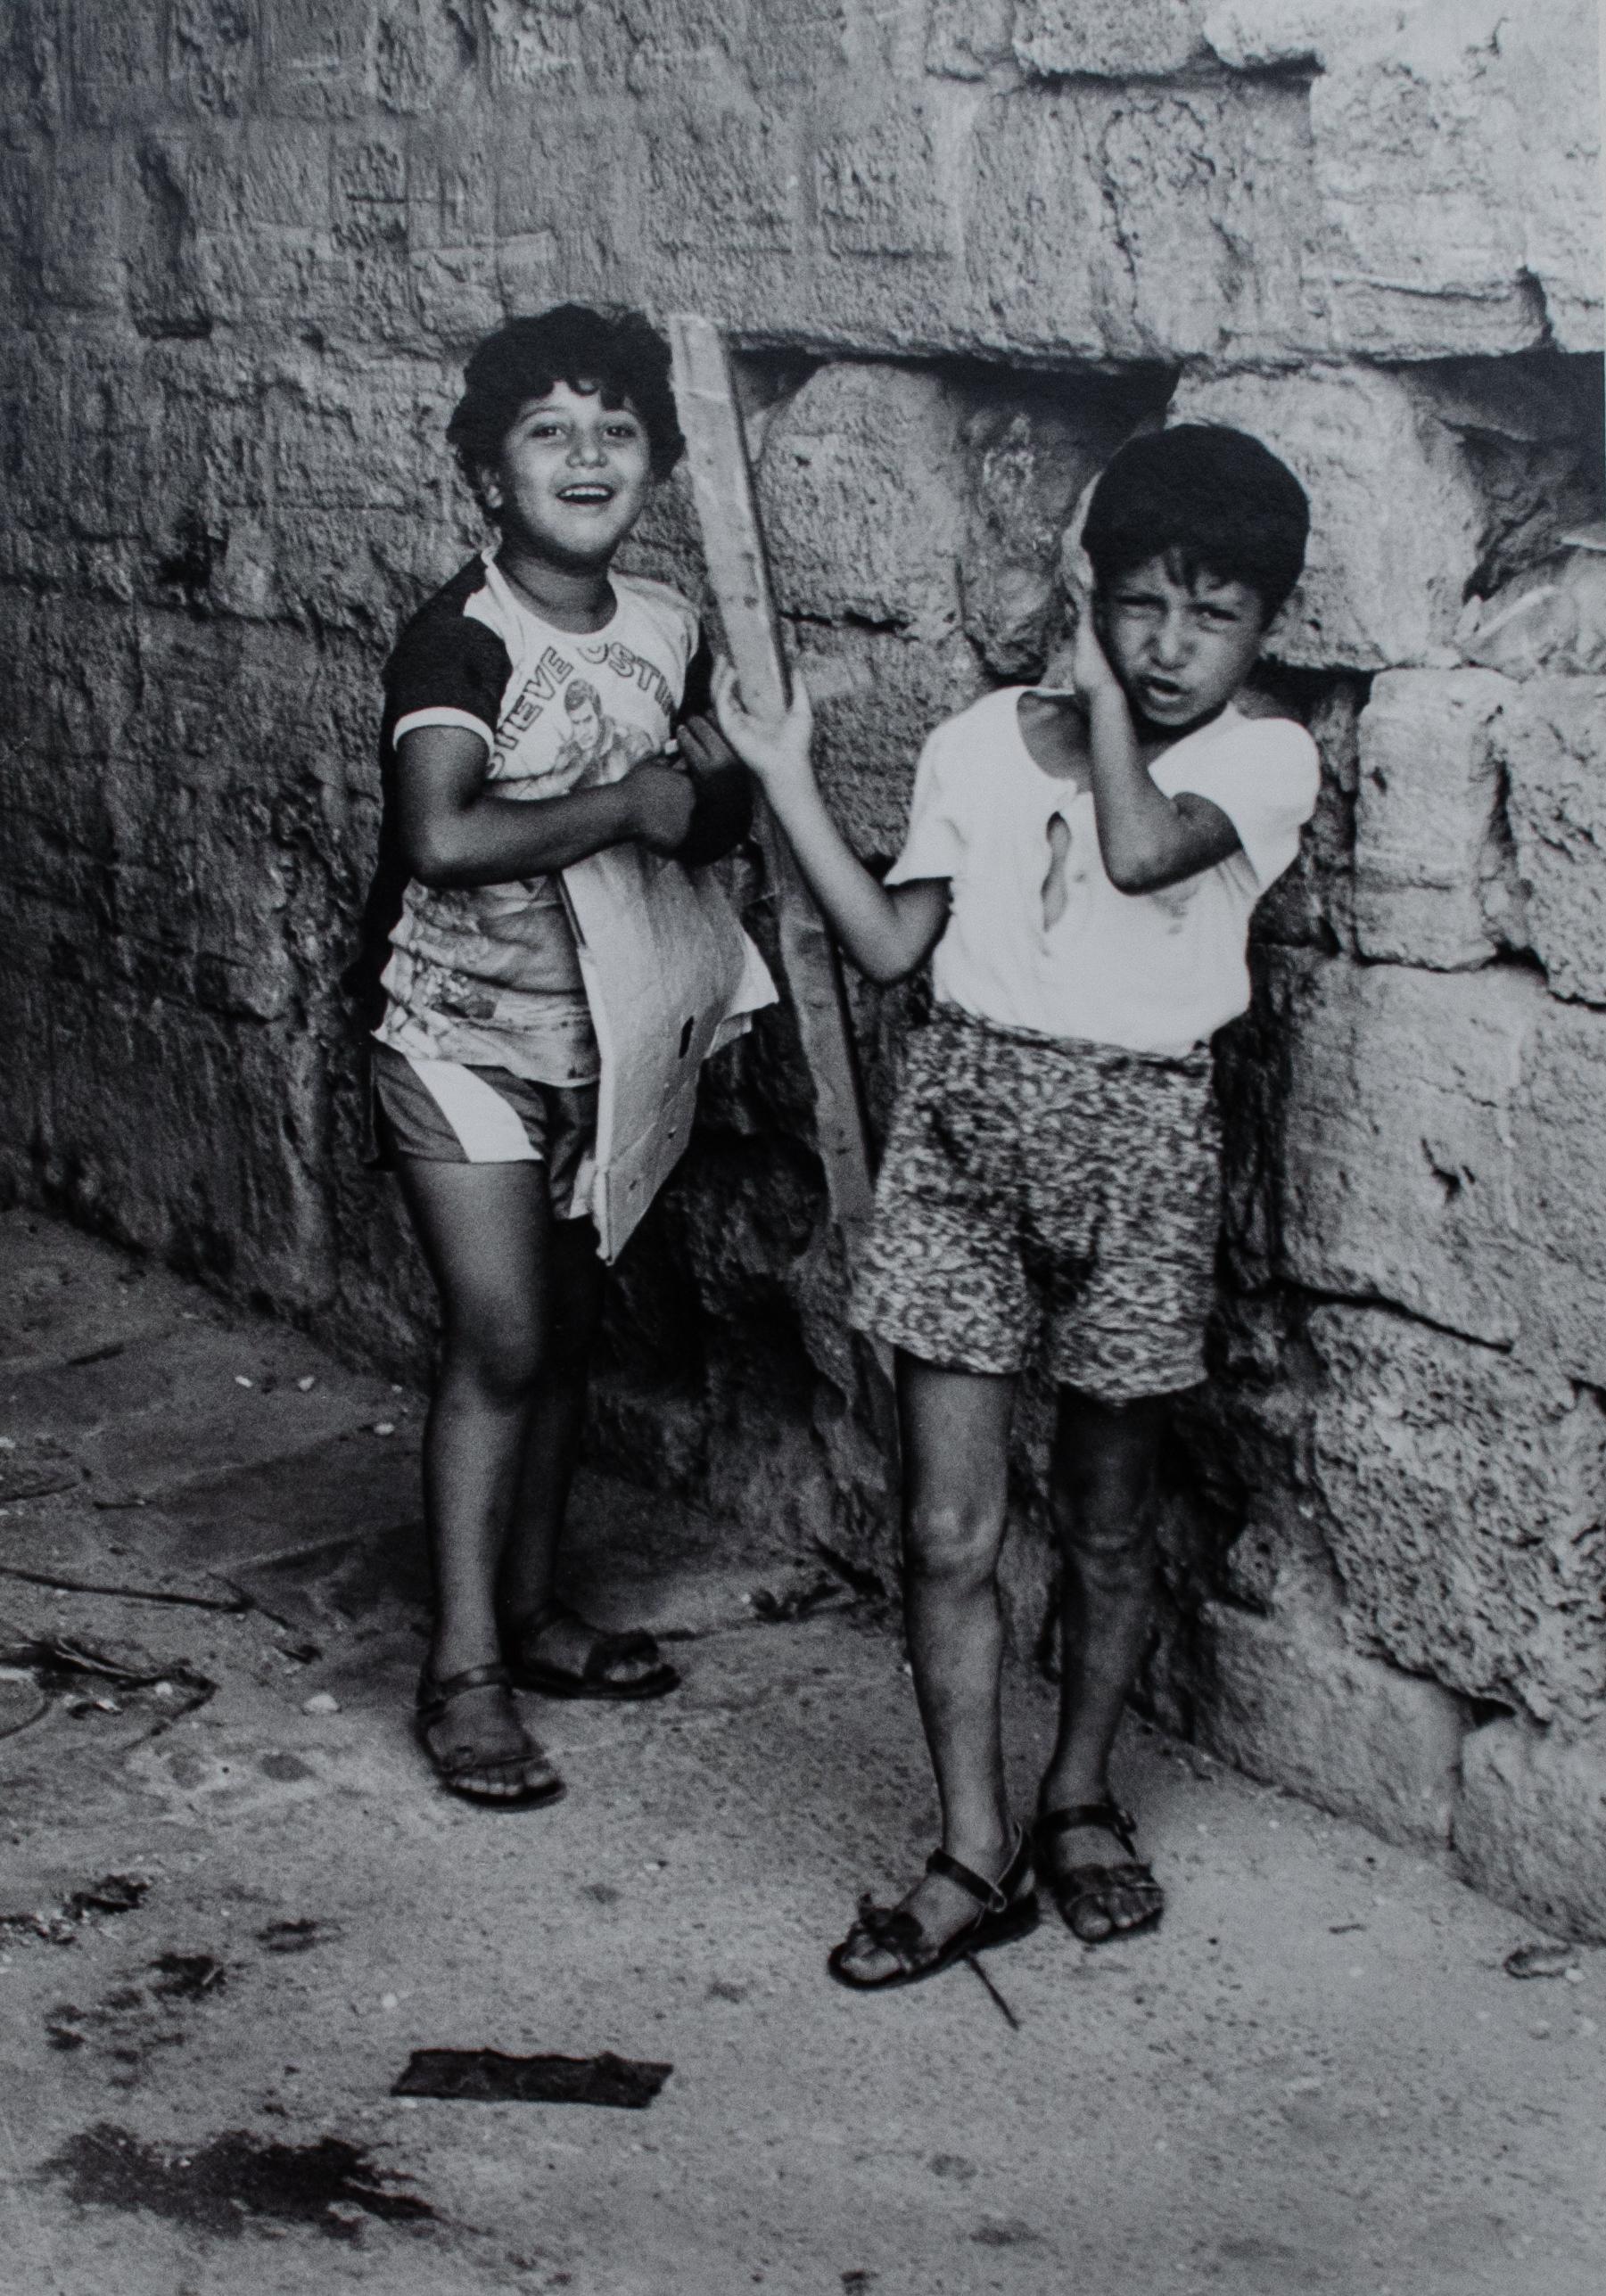 Ruth Harris
Arab Children, c. 1979
Two black and white photographic prints
Mat: 14 x 11 in. (each)
Photograph: 9 1/2 x 6 1/2 in. (each)
Signed Ruth Harris
